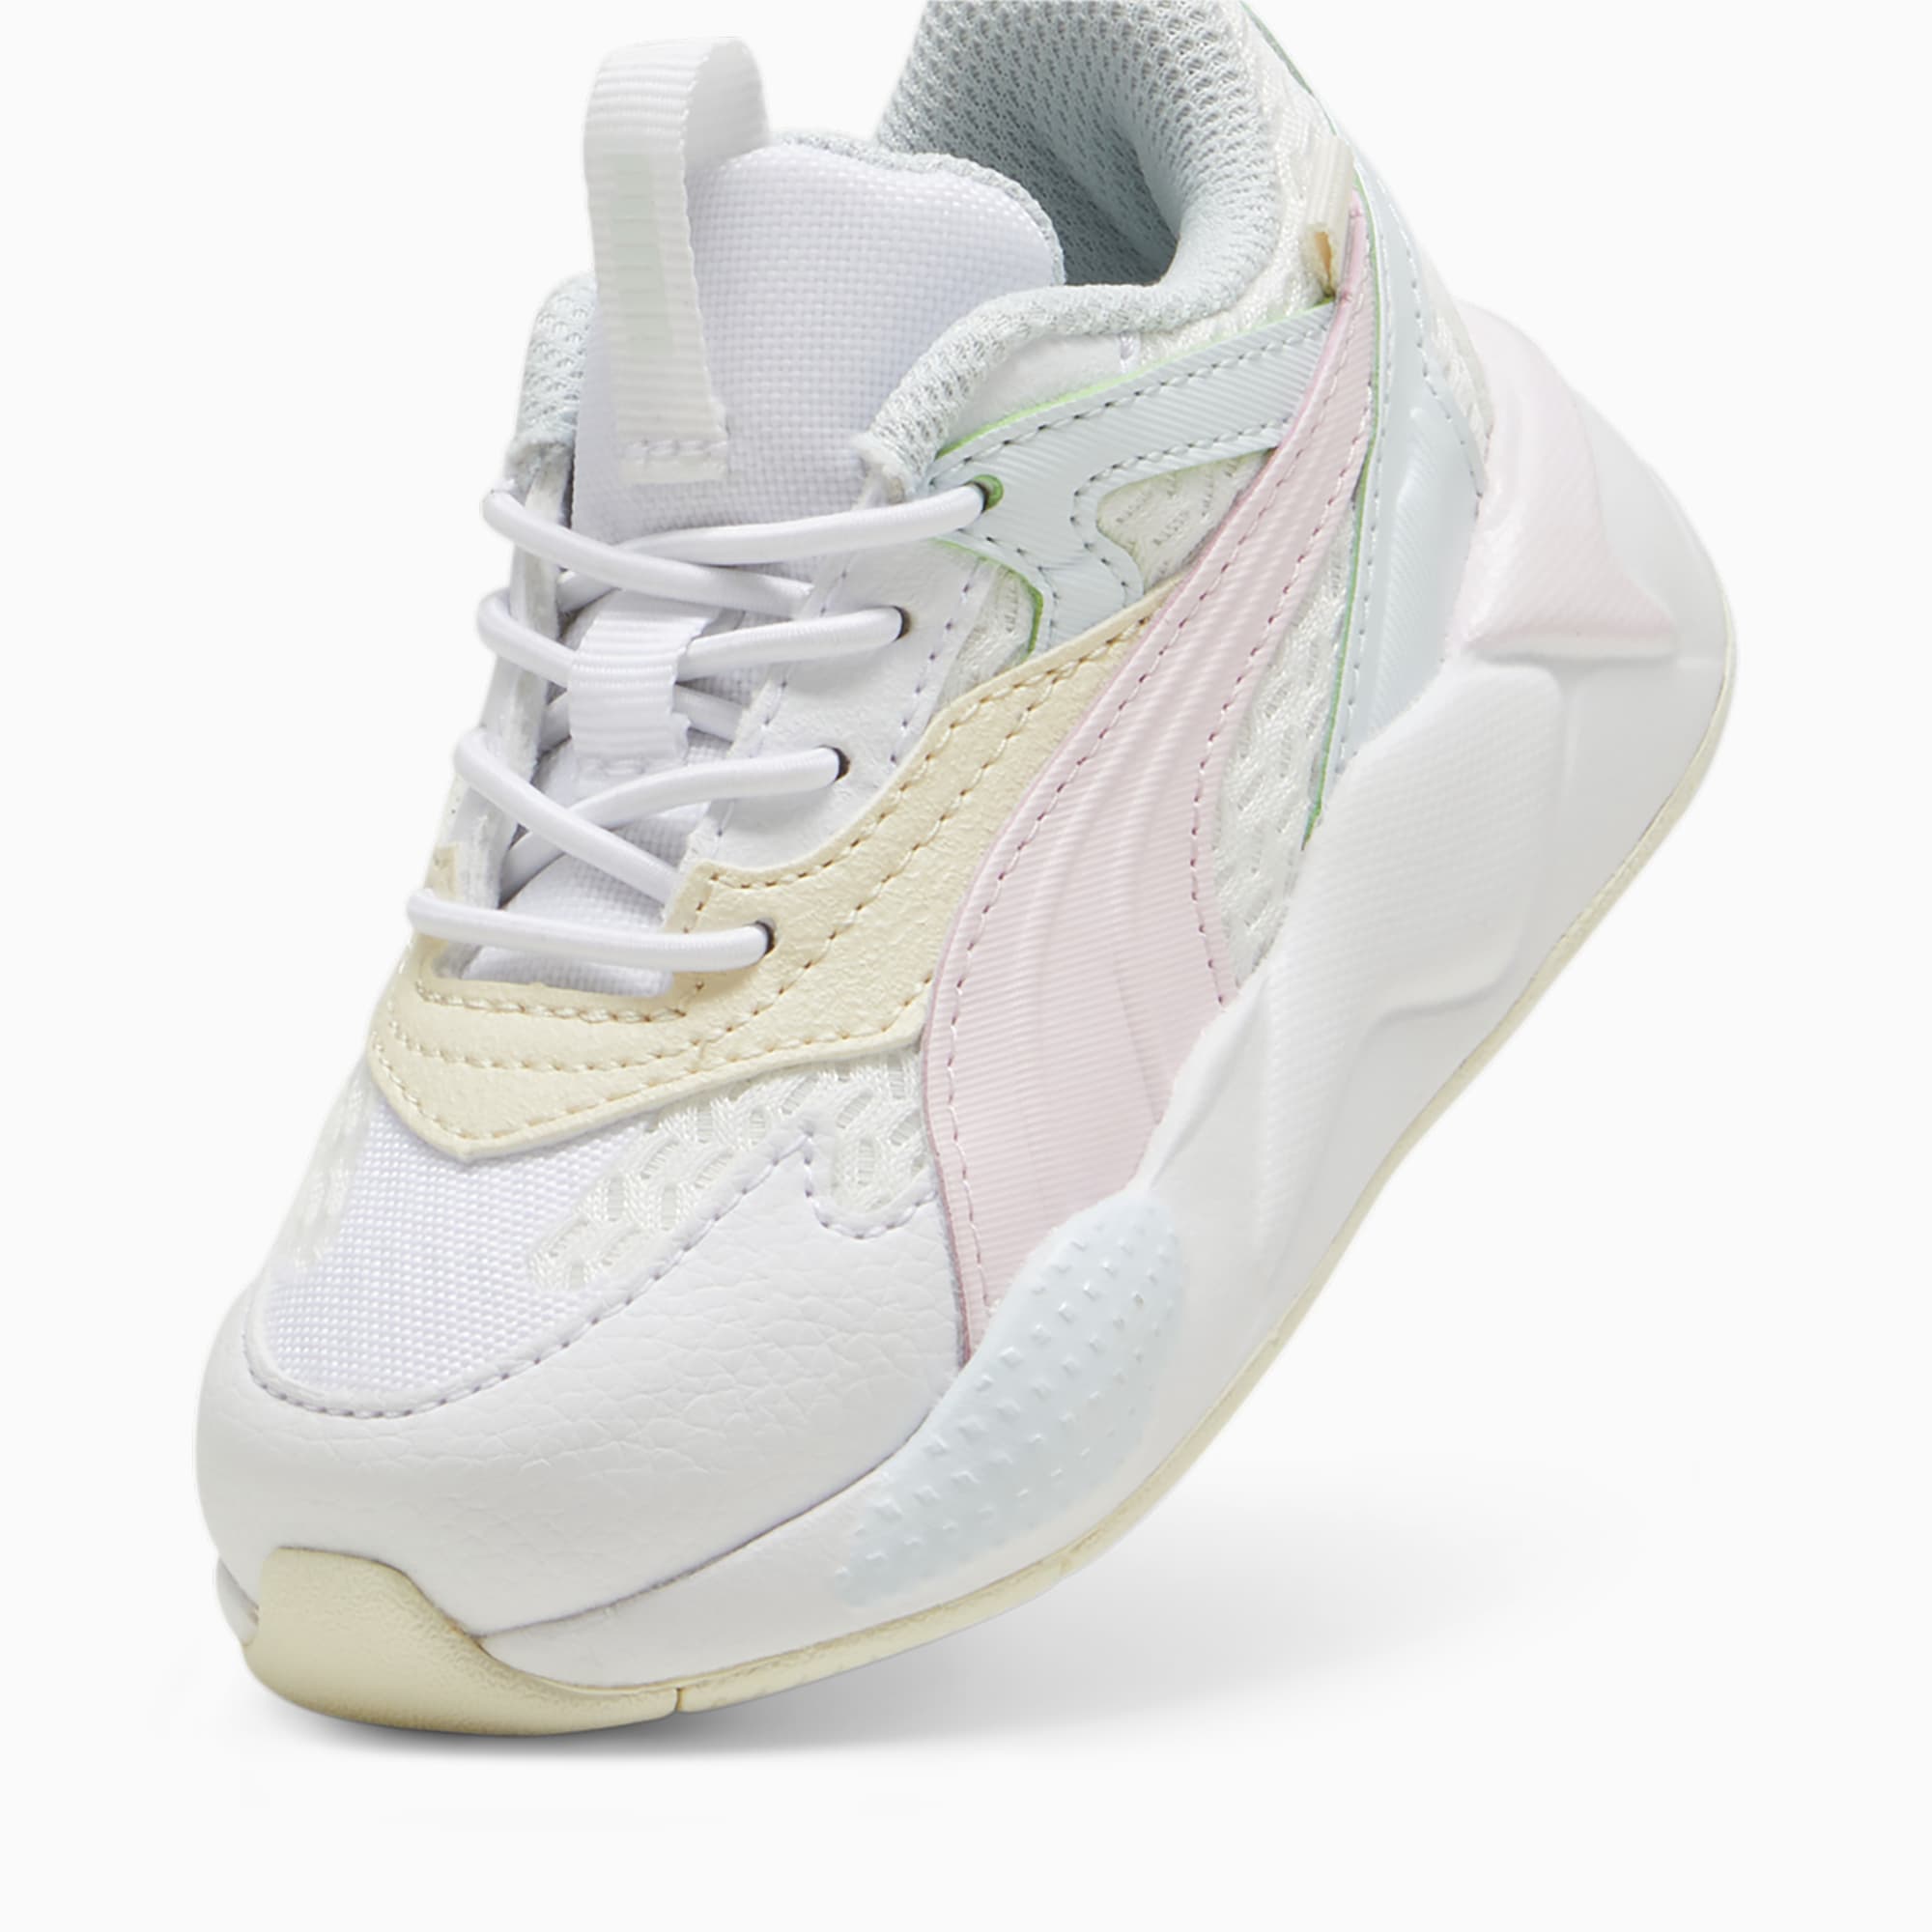 PUMA Rs-X Efekt Toddlers' Sneakers, White/Whisp Of Pink, Size 19, Shoes